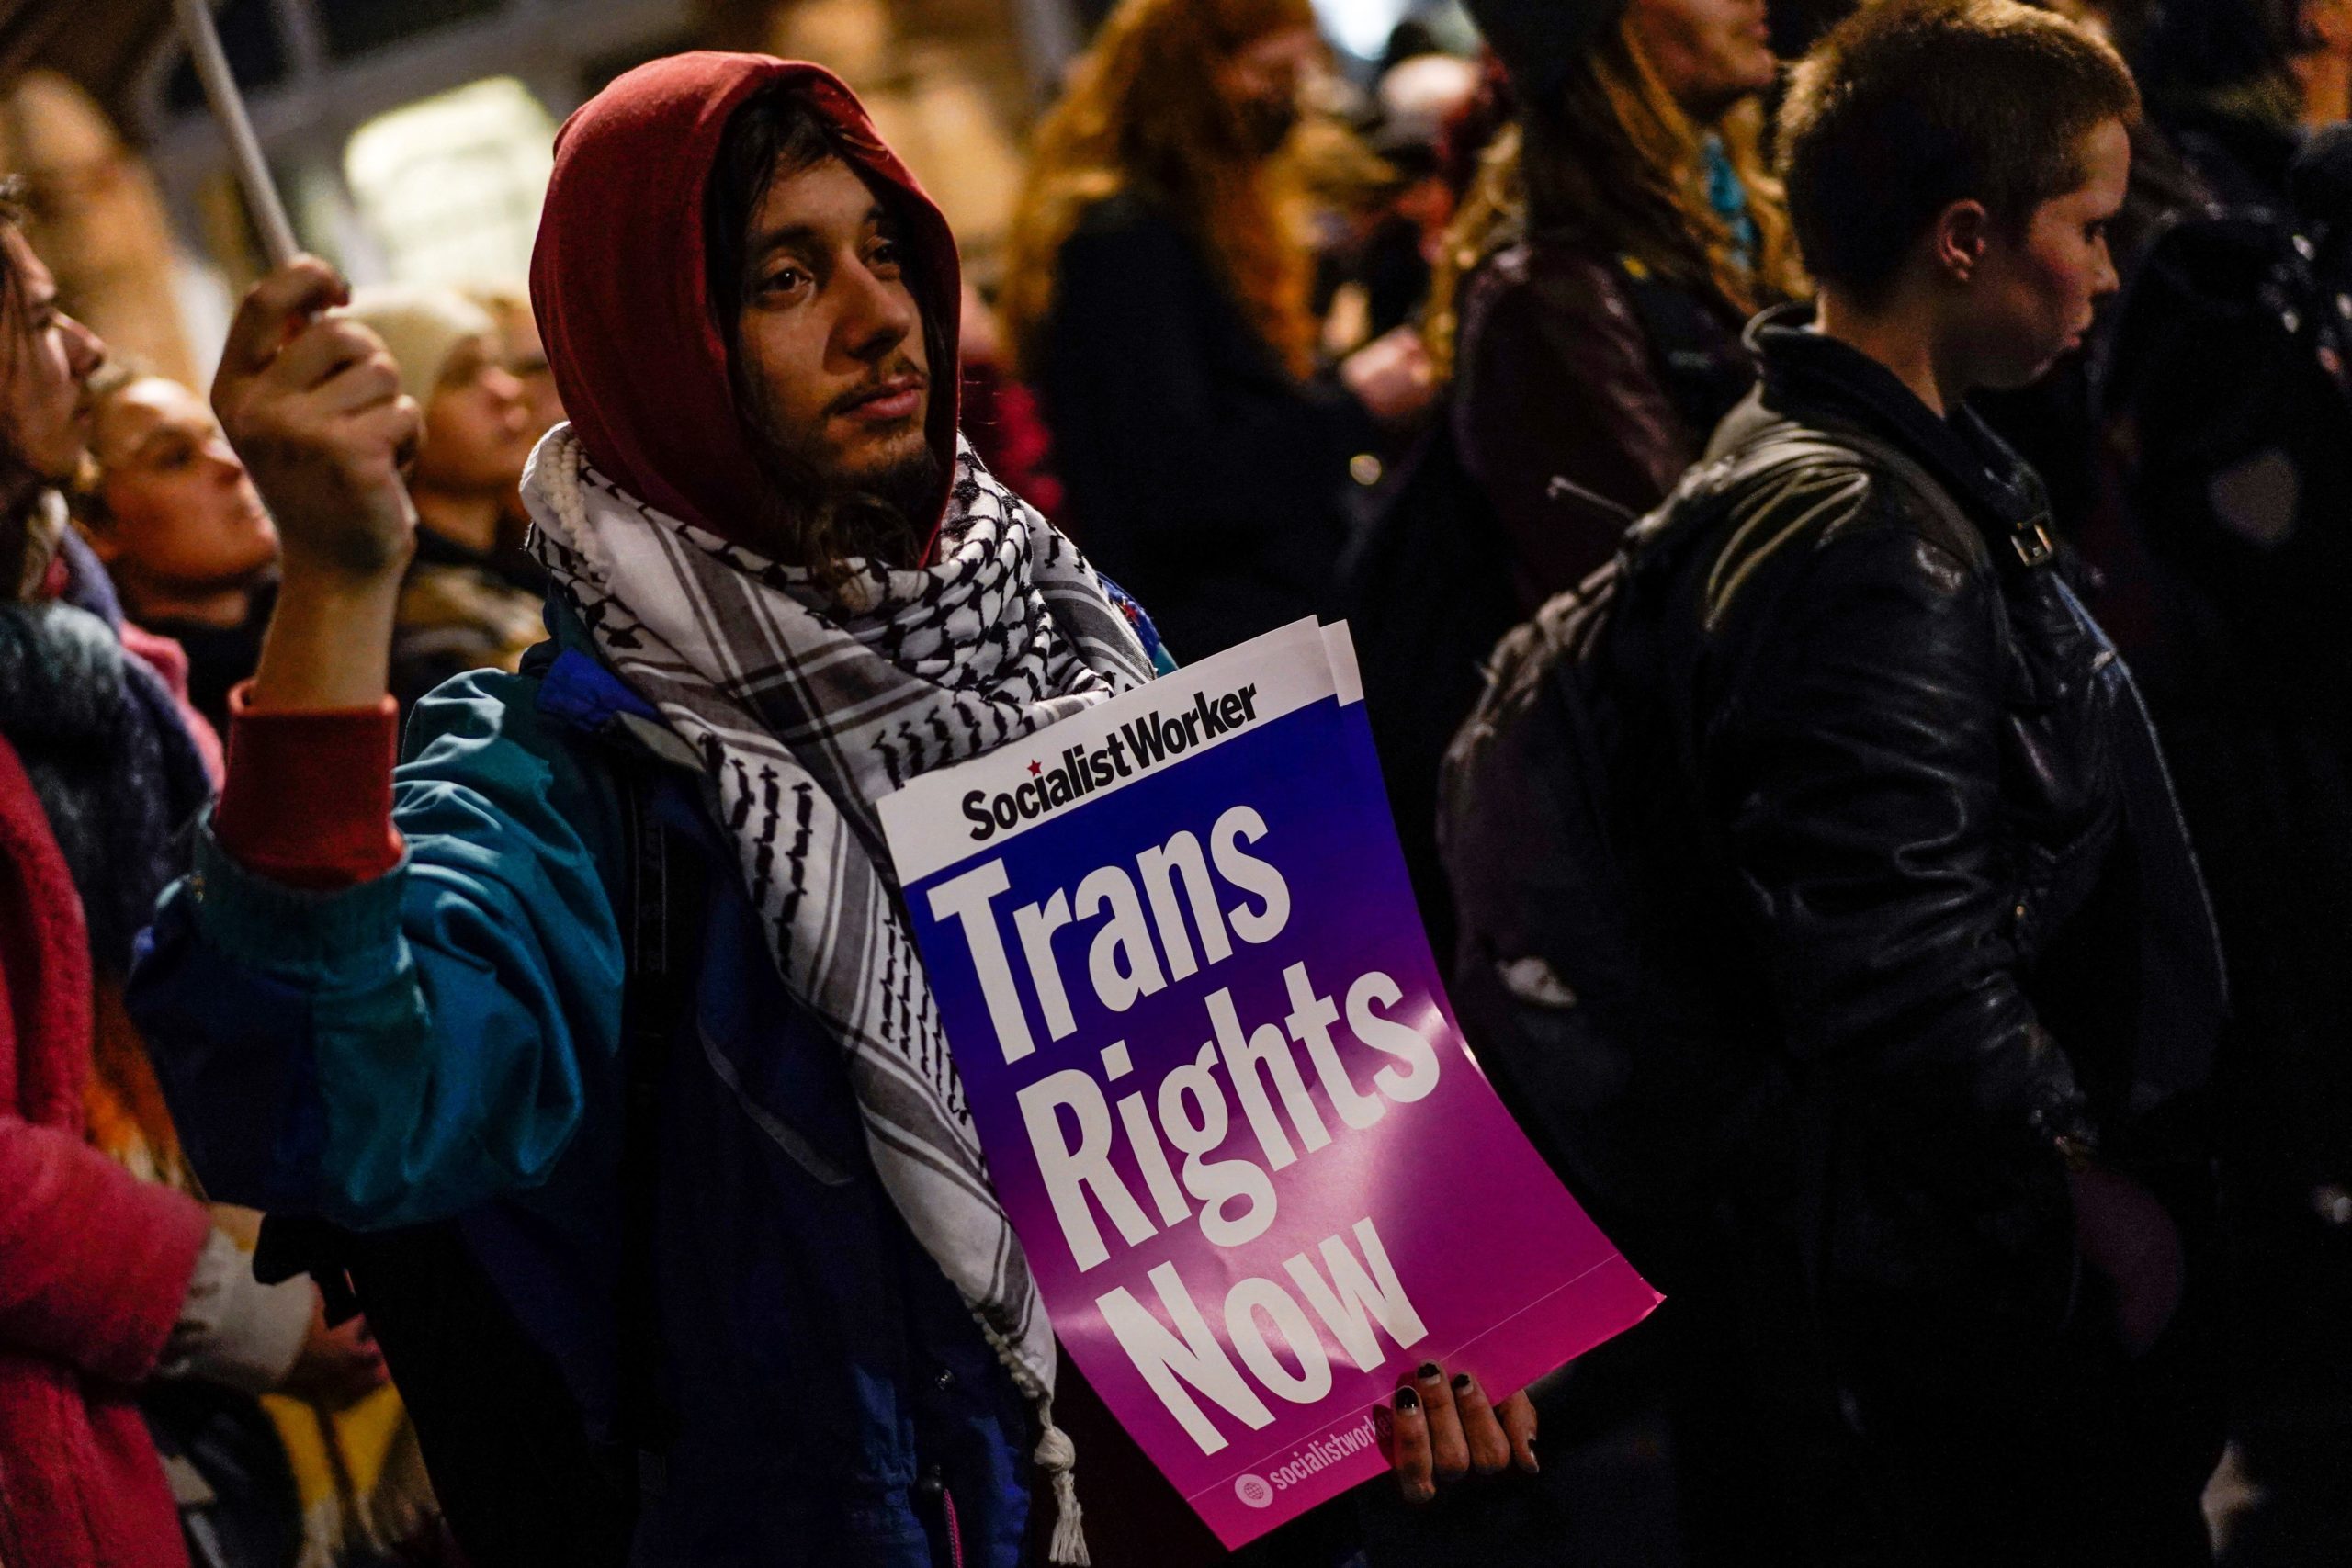 A person hols a placard while taking part in a vigil, in London, on February 15, 2023 in tribute of 16-year-old transgender teen, Brianna Ghey, stabbed to death. - Brianna Ghey was fatally stabbed in Warrington, northwest England, on February 11, 2023. Members of the public found her on a path in a park that afternoon. Cheshire Police arrested two 15-year-olds, a boy and a girl, from nearby Leigh, on Sunday and on Wednesday charged them with her murder. (Photo by Niklas HALLE'N / AFP) (Photo by NIKLAS HALLE'N/AFP via Getty Images)